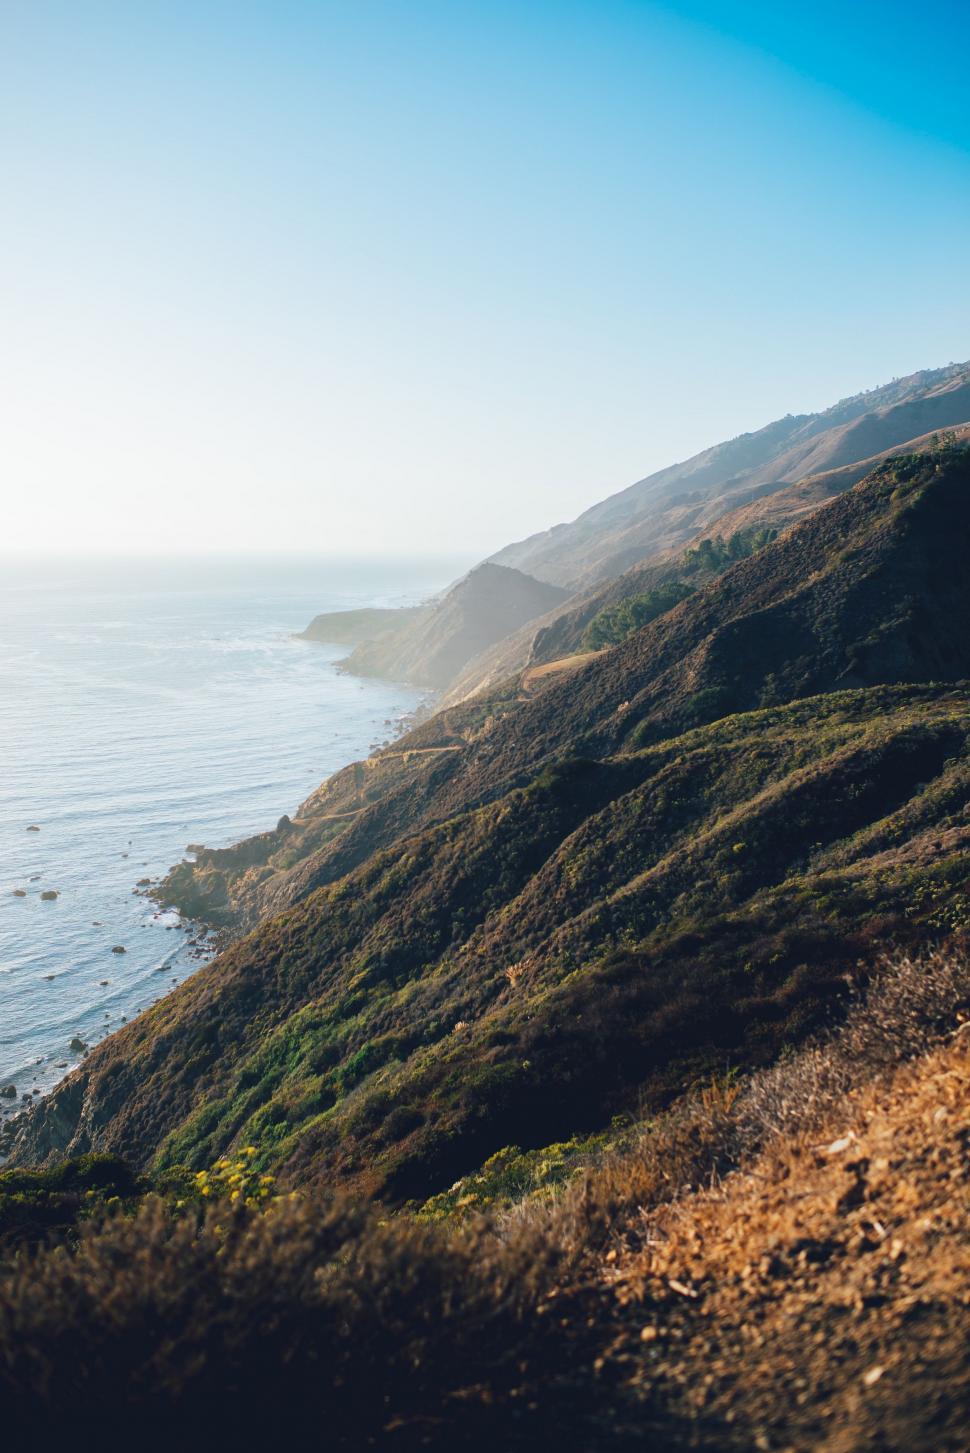 Free Image of Panoramic View of the Ocean From a Hill 